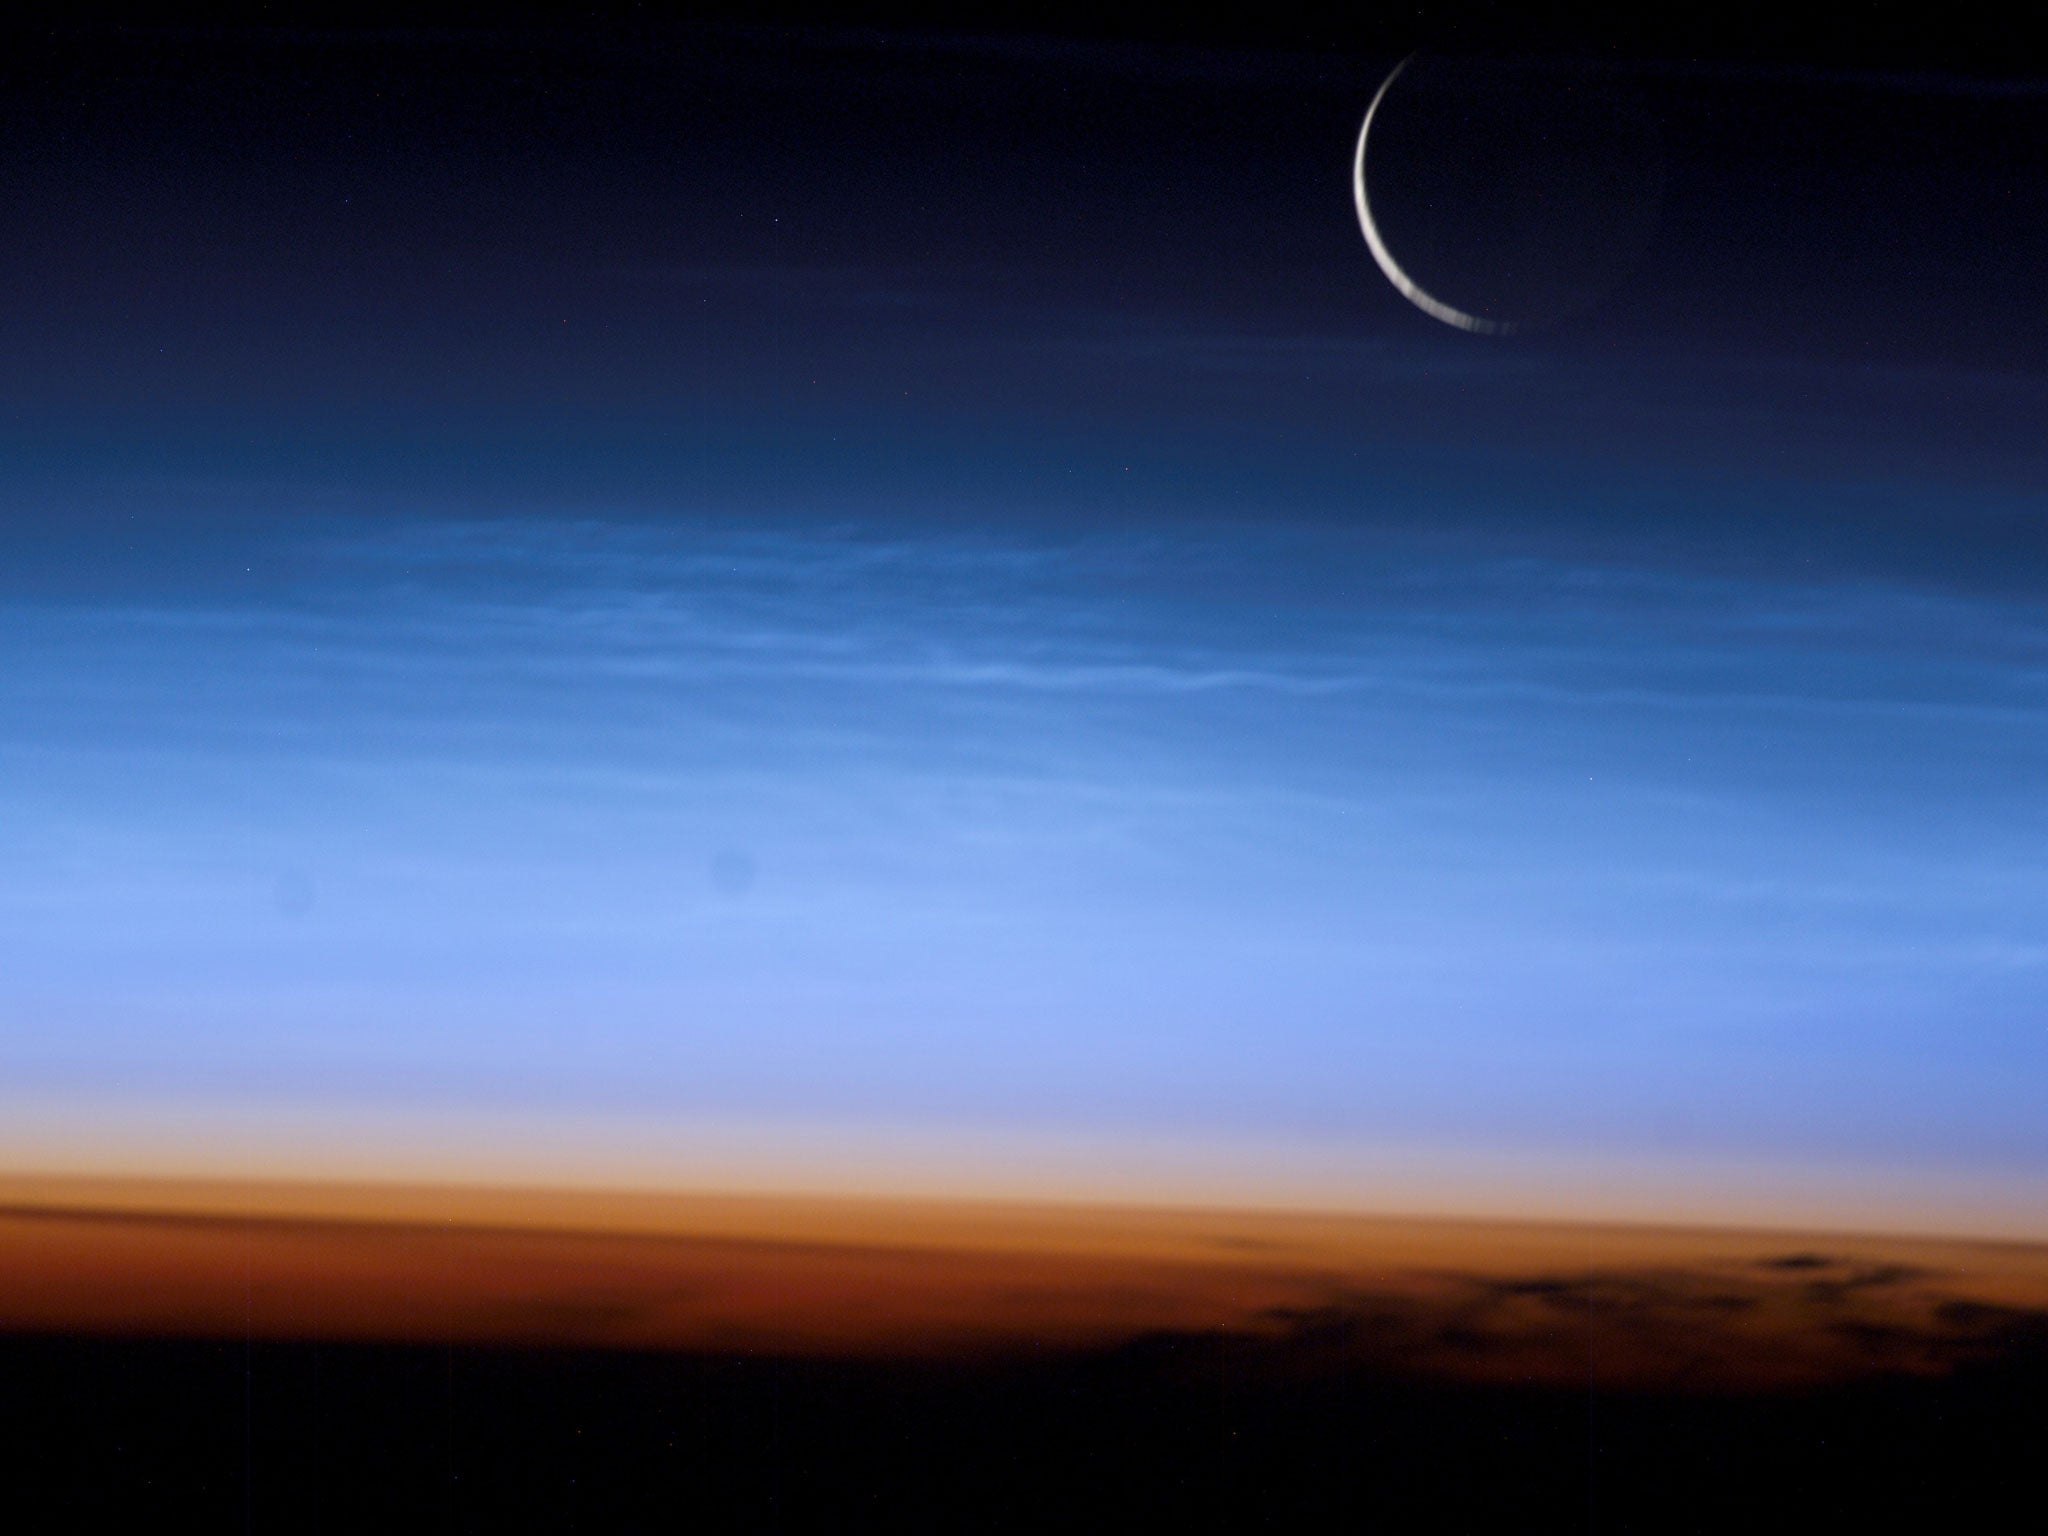 Noctilucent clouds shine only at night, after all the other clouds have left the skies.